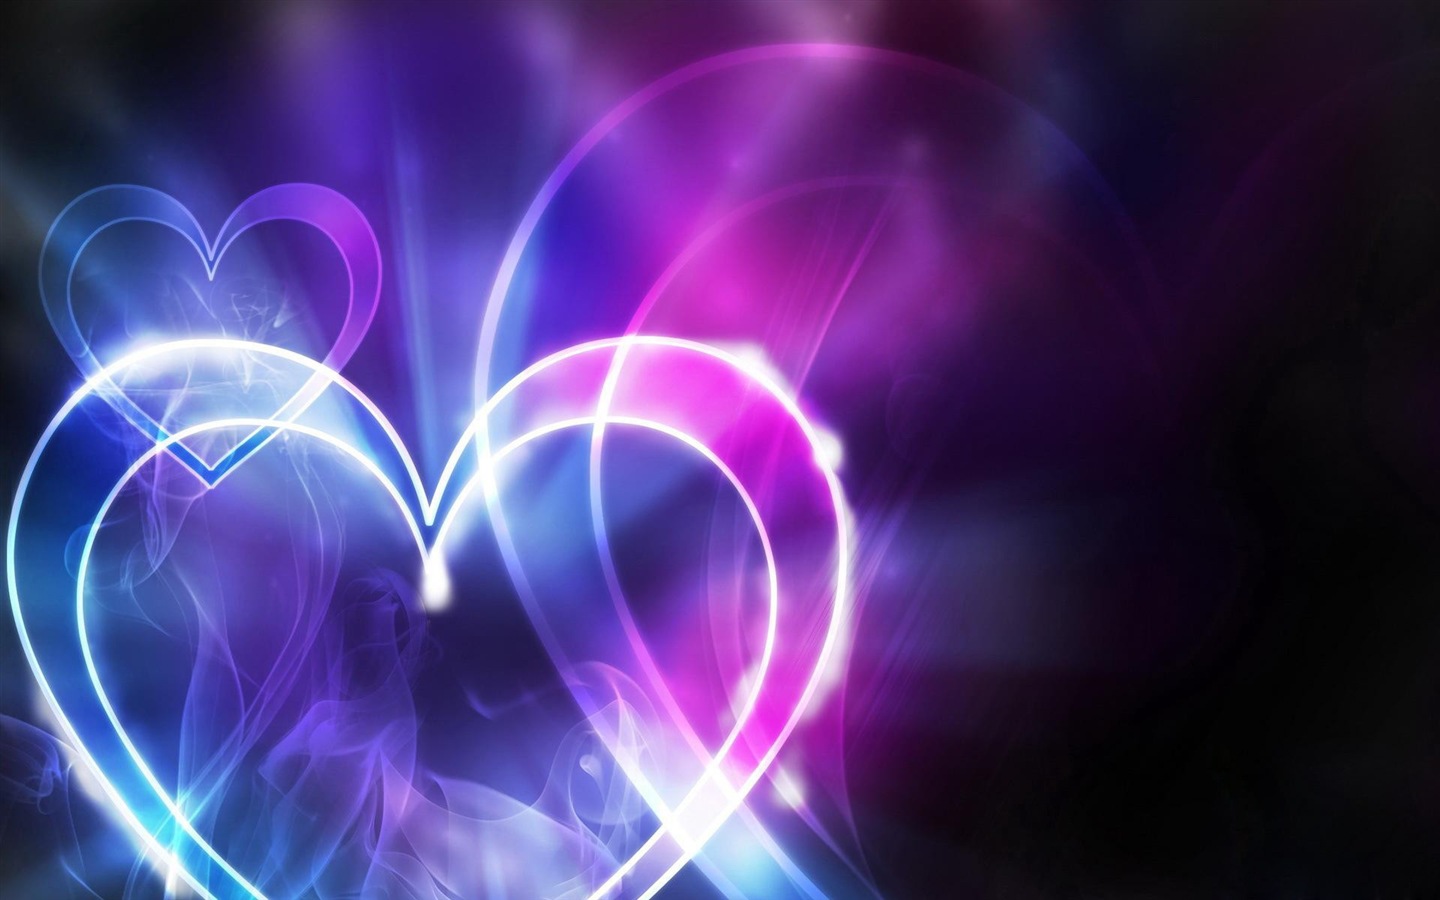 The theme of love, creative heart-shaped HD wallpapers #8 - 1440x900